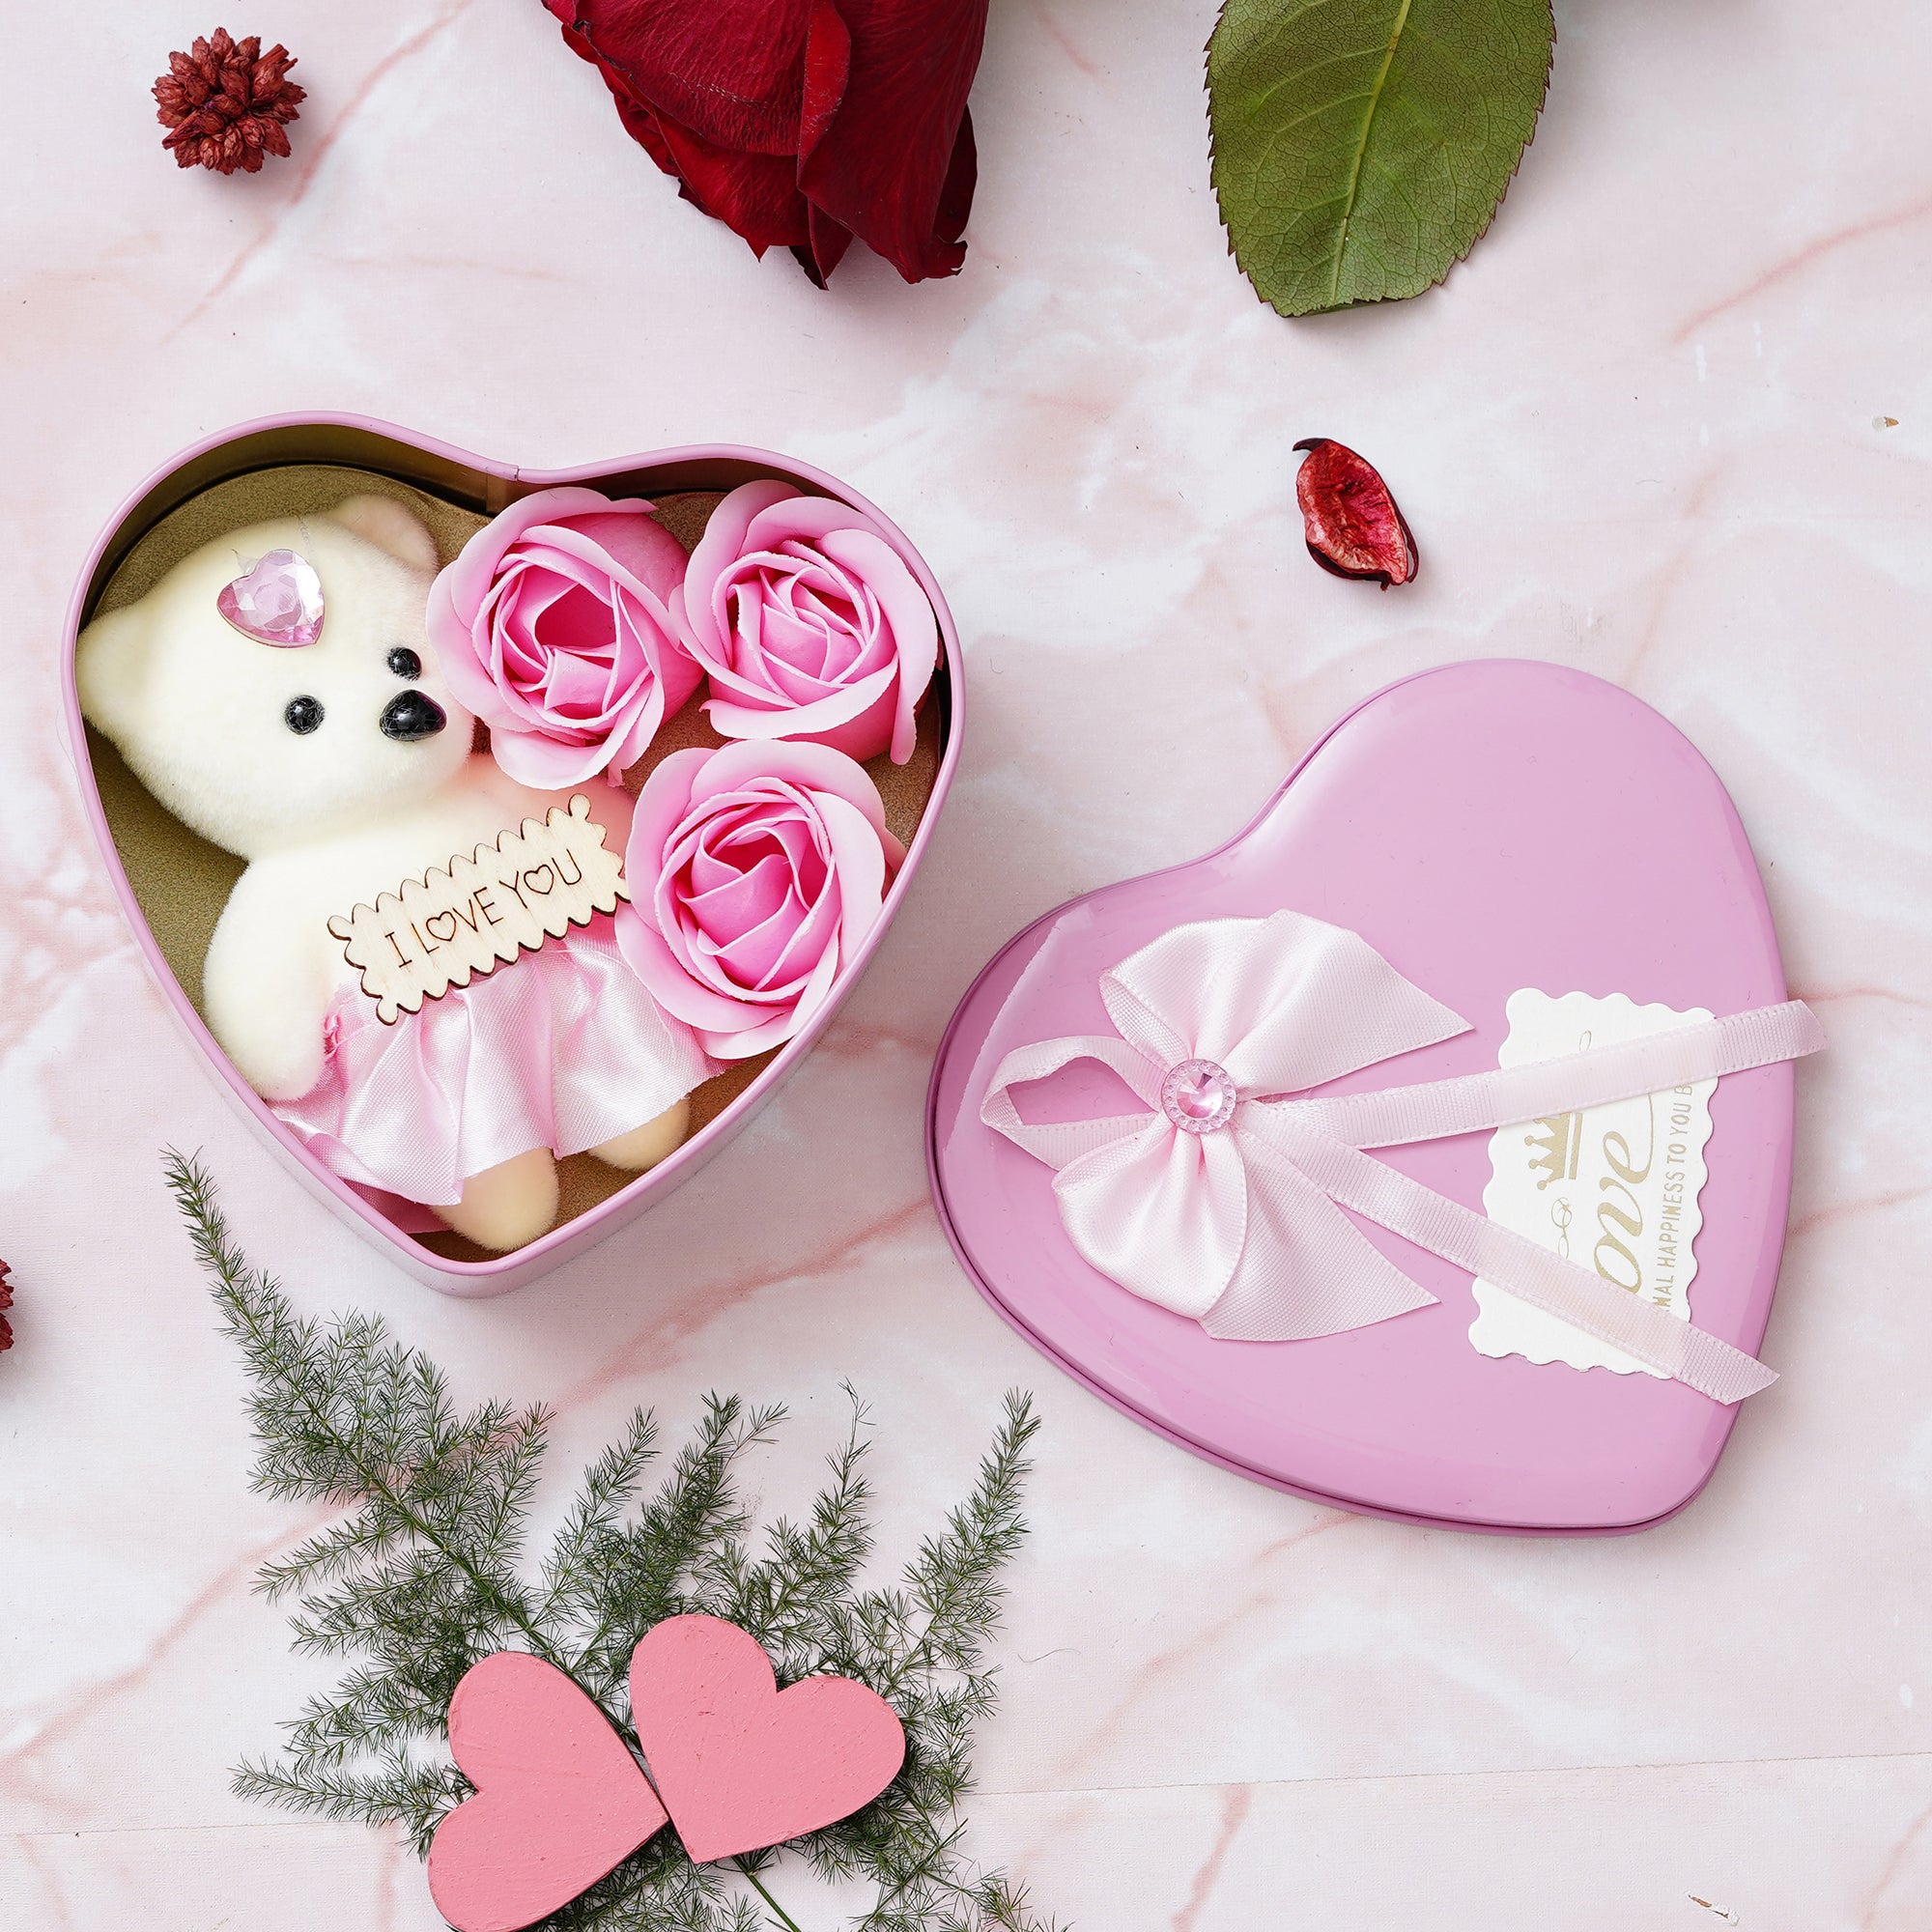 Valentine Combo of Pack of 8 Love Gift Cards, Love Golden Rose Table Decor Gift Set Showpiece, Pink Heart Shaped Gift Box with Teddy and Roses 5